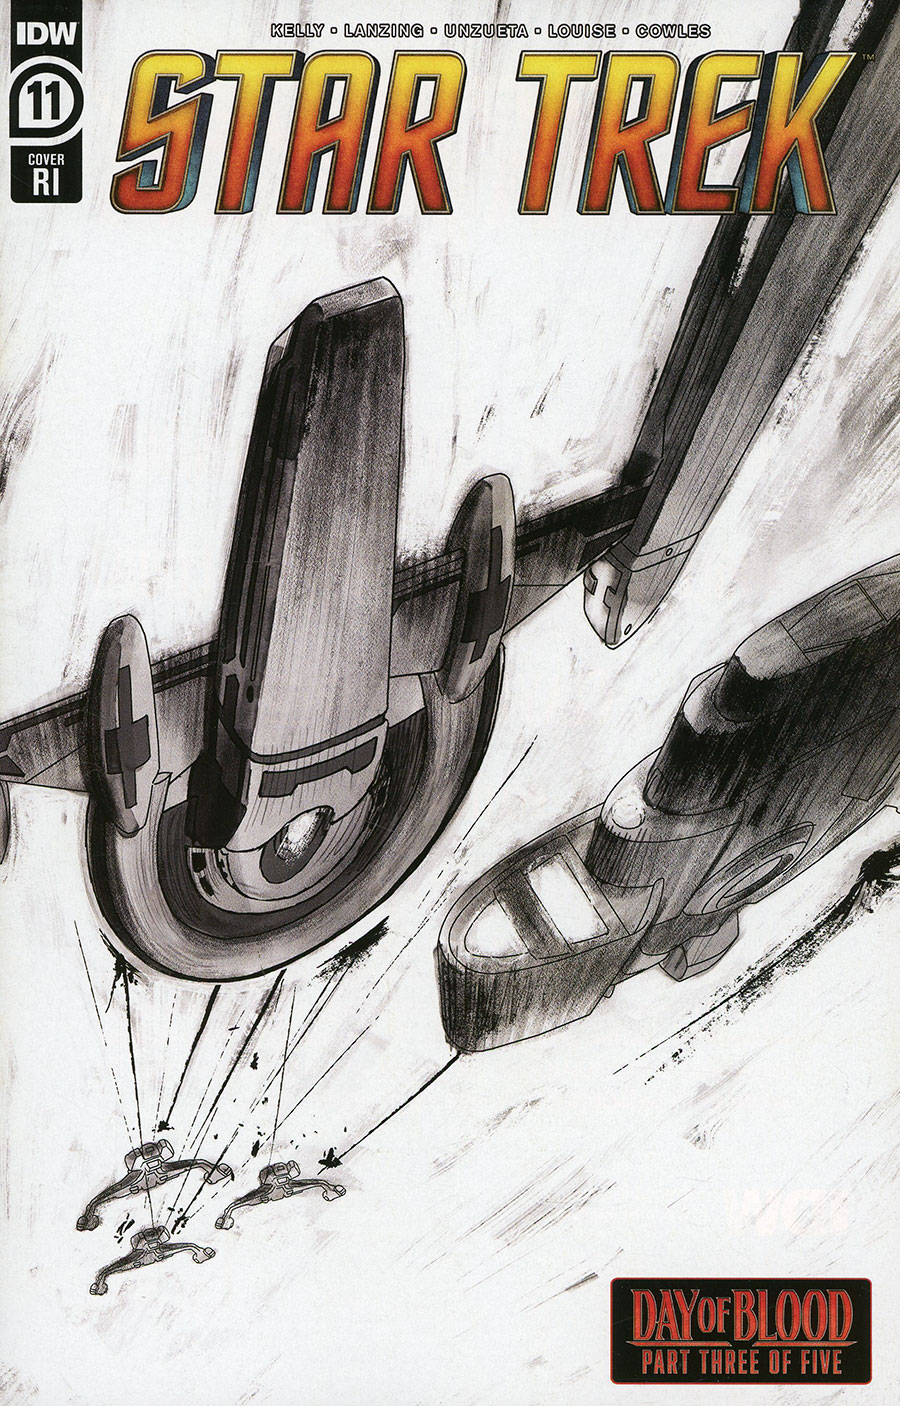 Star Trek (IDW) Vol 2 #11 Cover D Incentive Malachi Ward Black & White Cover (Day Of Blood Part 3)